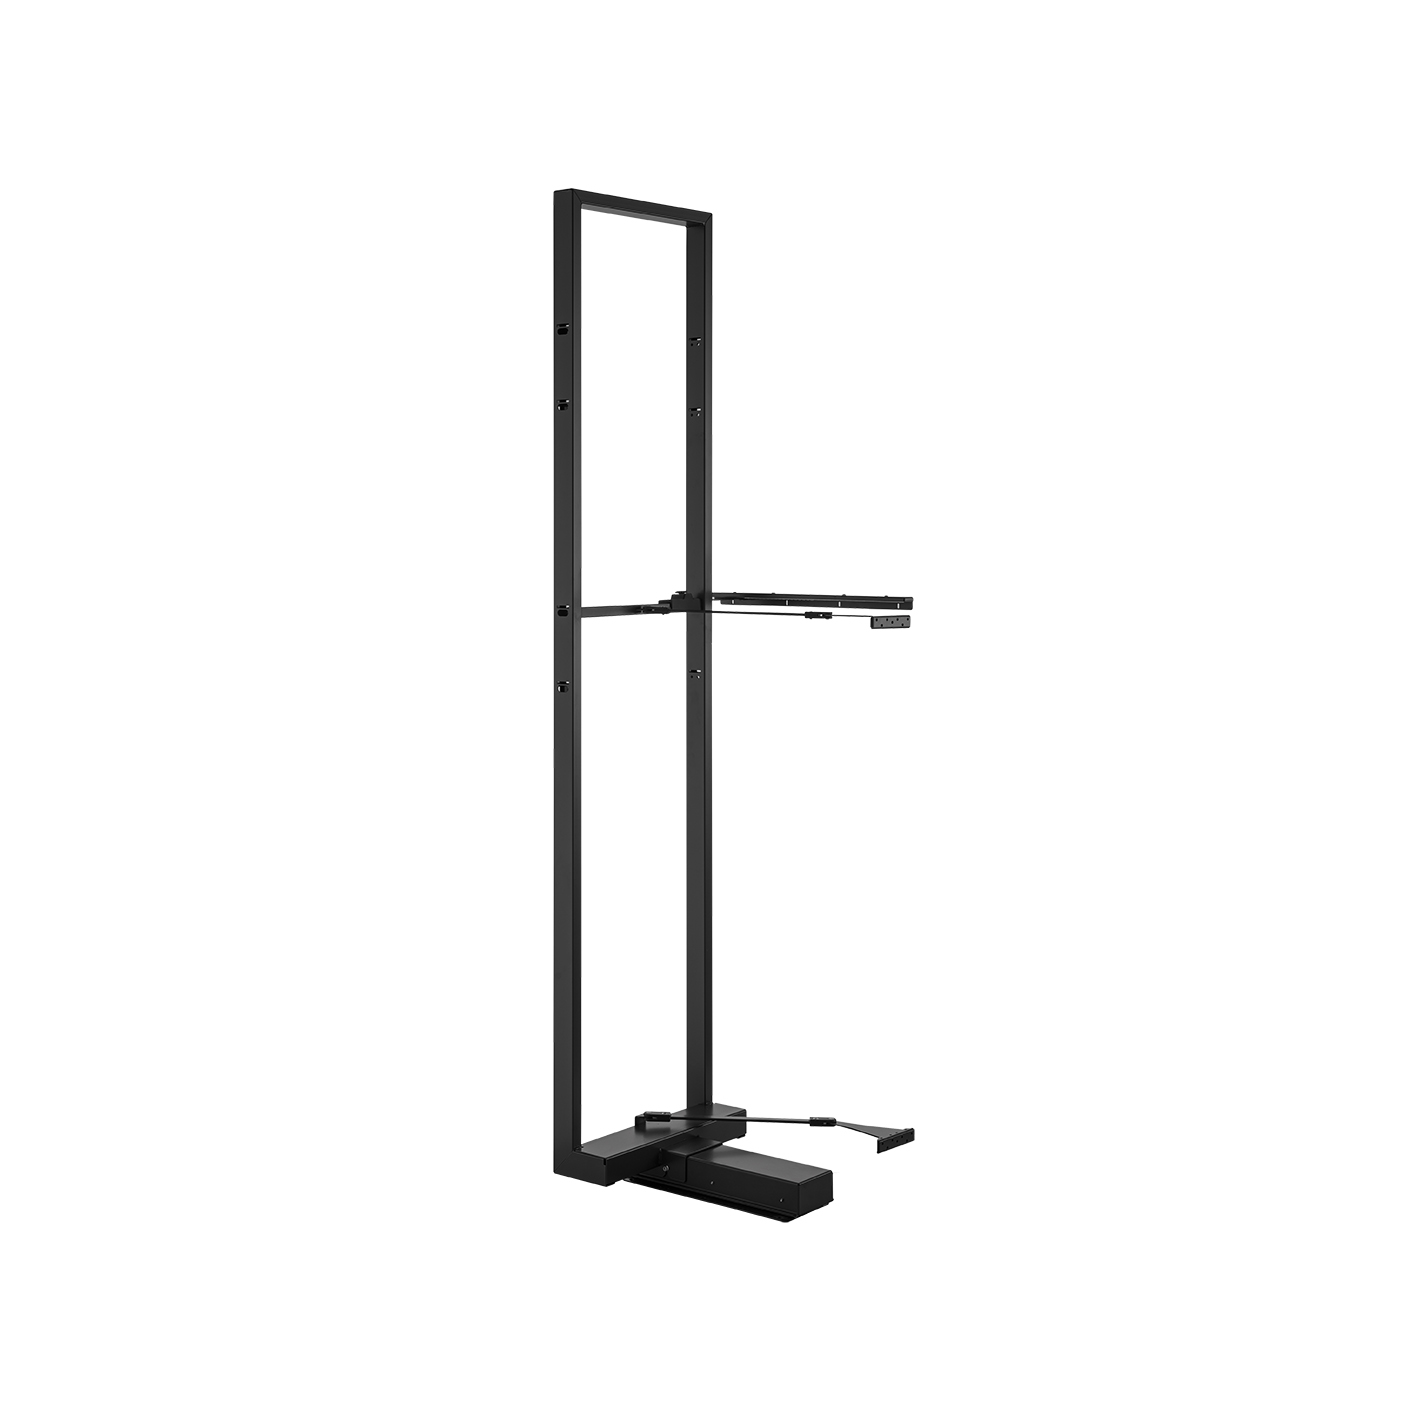 Vibo Maxi Pantry Pullout Frame 450mm (18in) Anthracite Grey